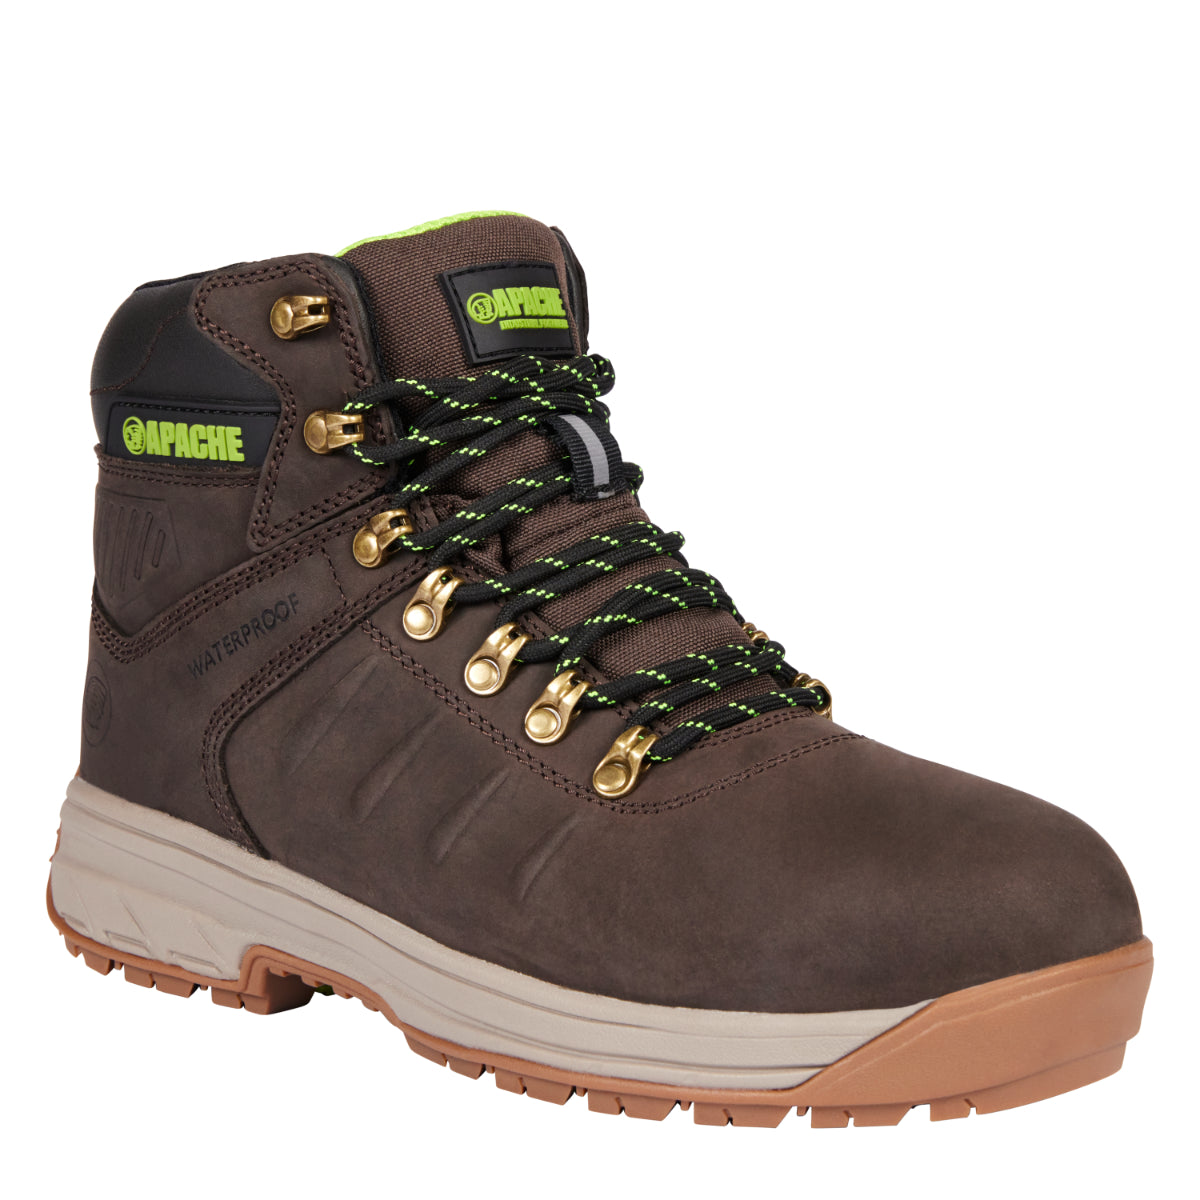 Apache Brown Leather Waterproof Safety Boot - XTS Outsole